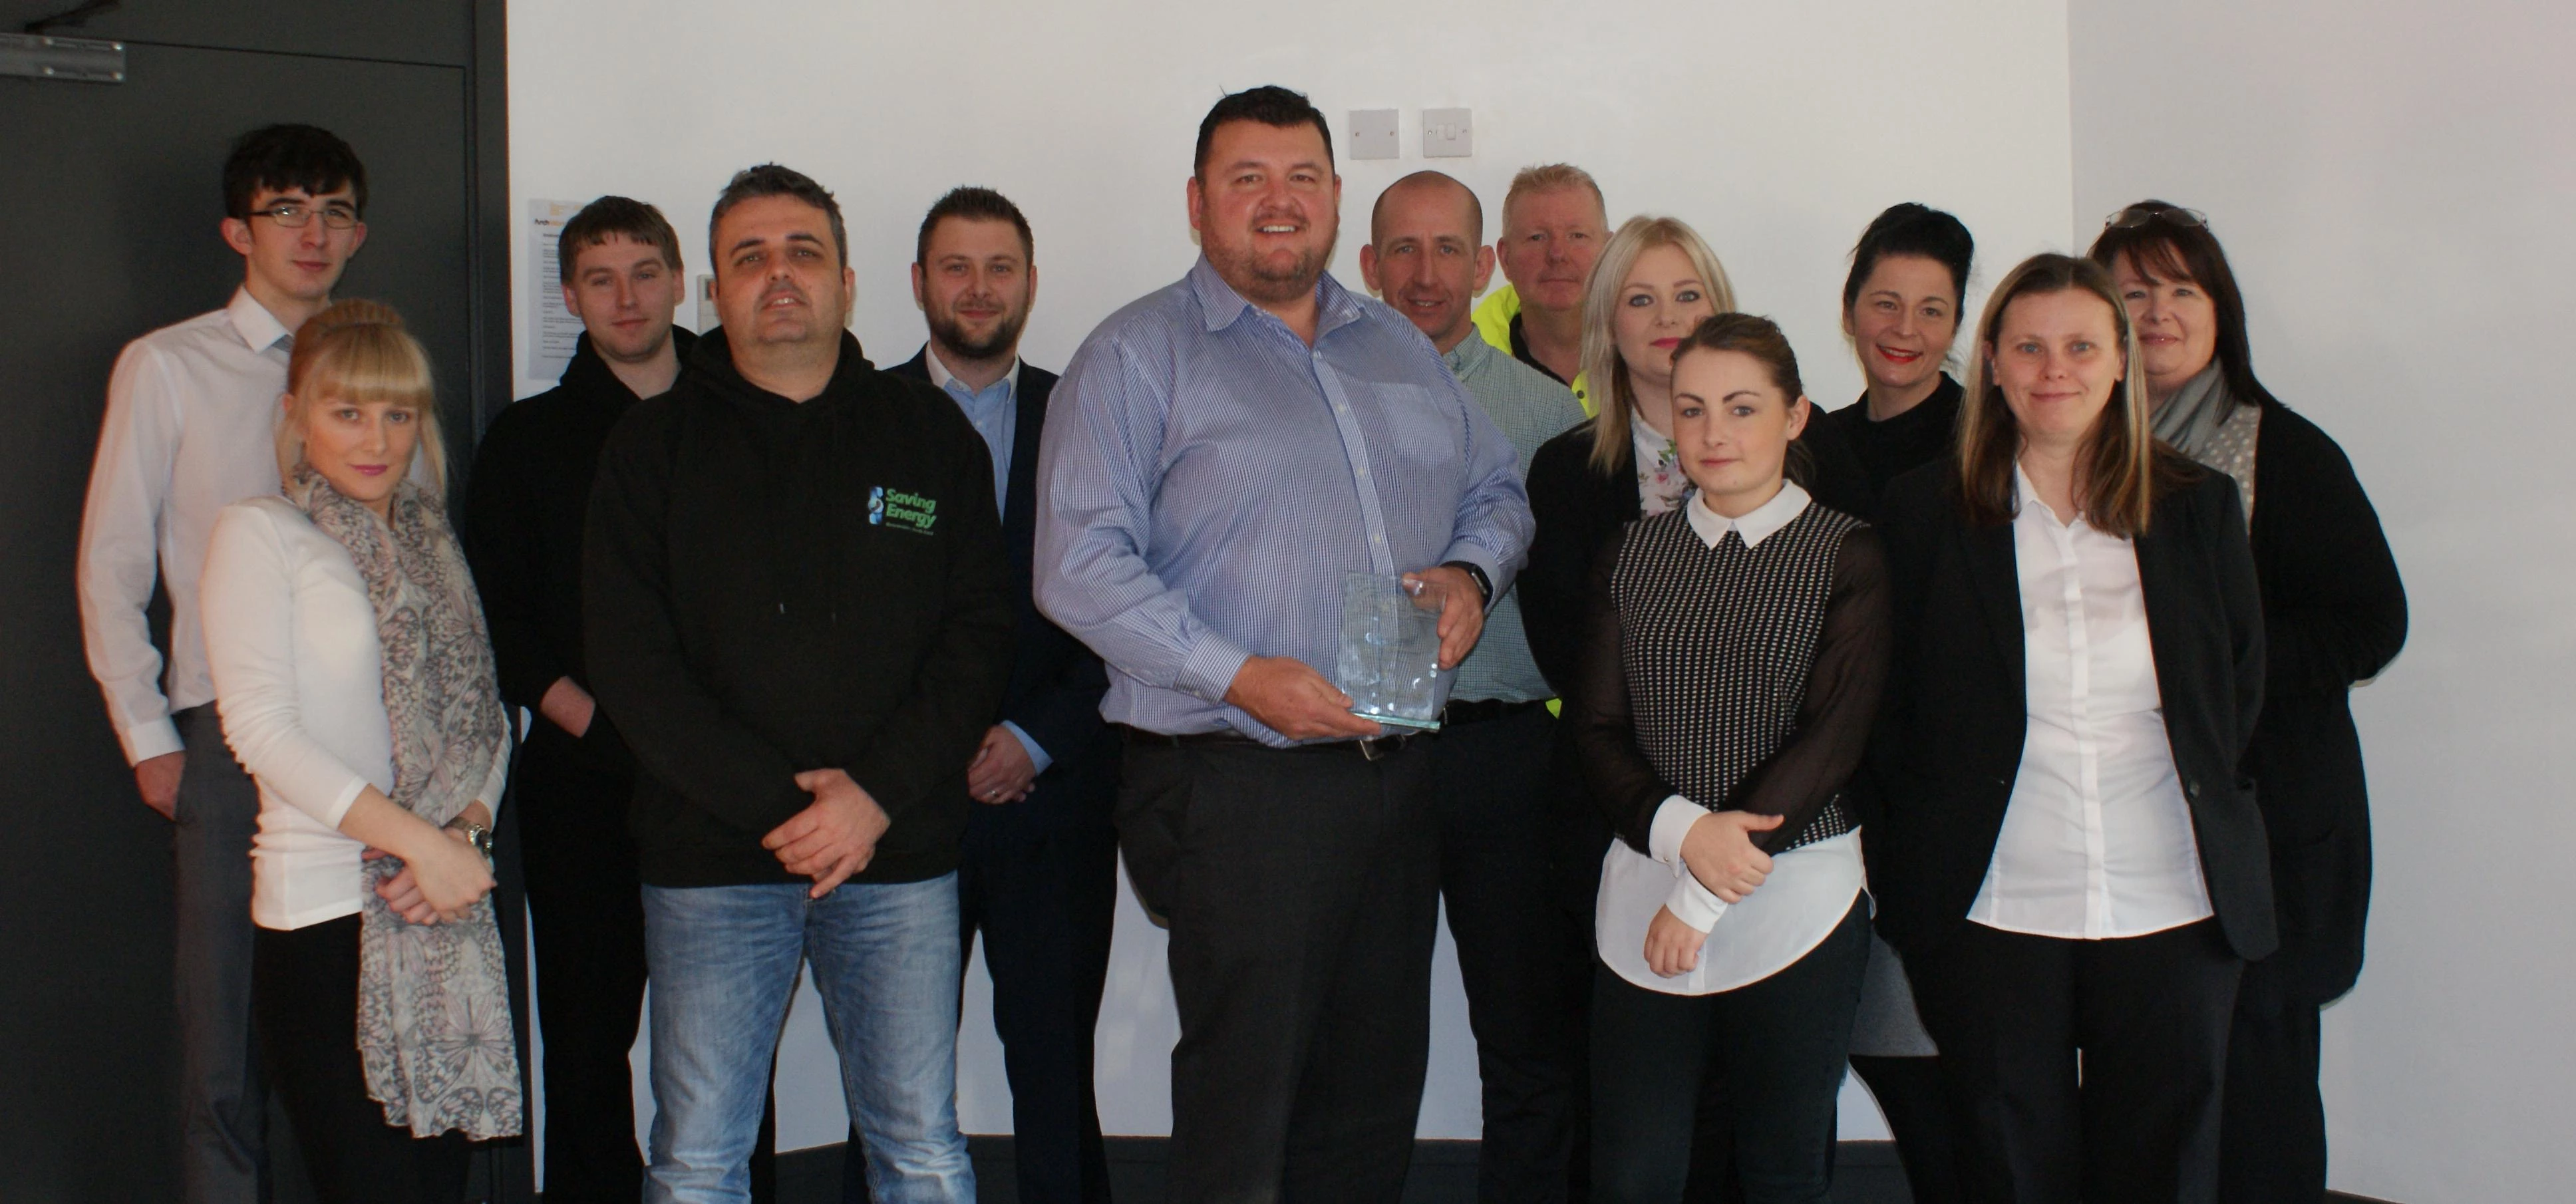 The team at Saving Energy with their new business of the year award